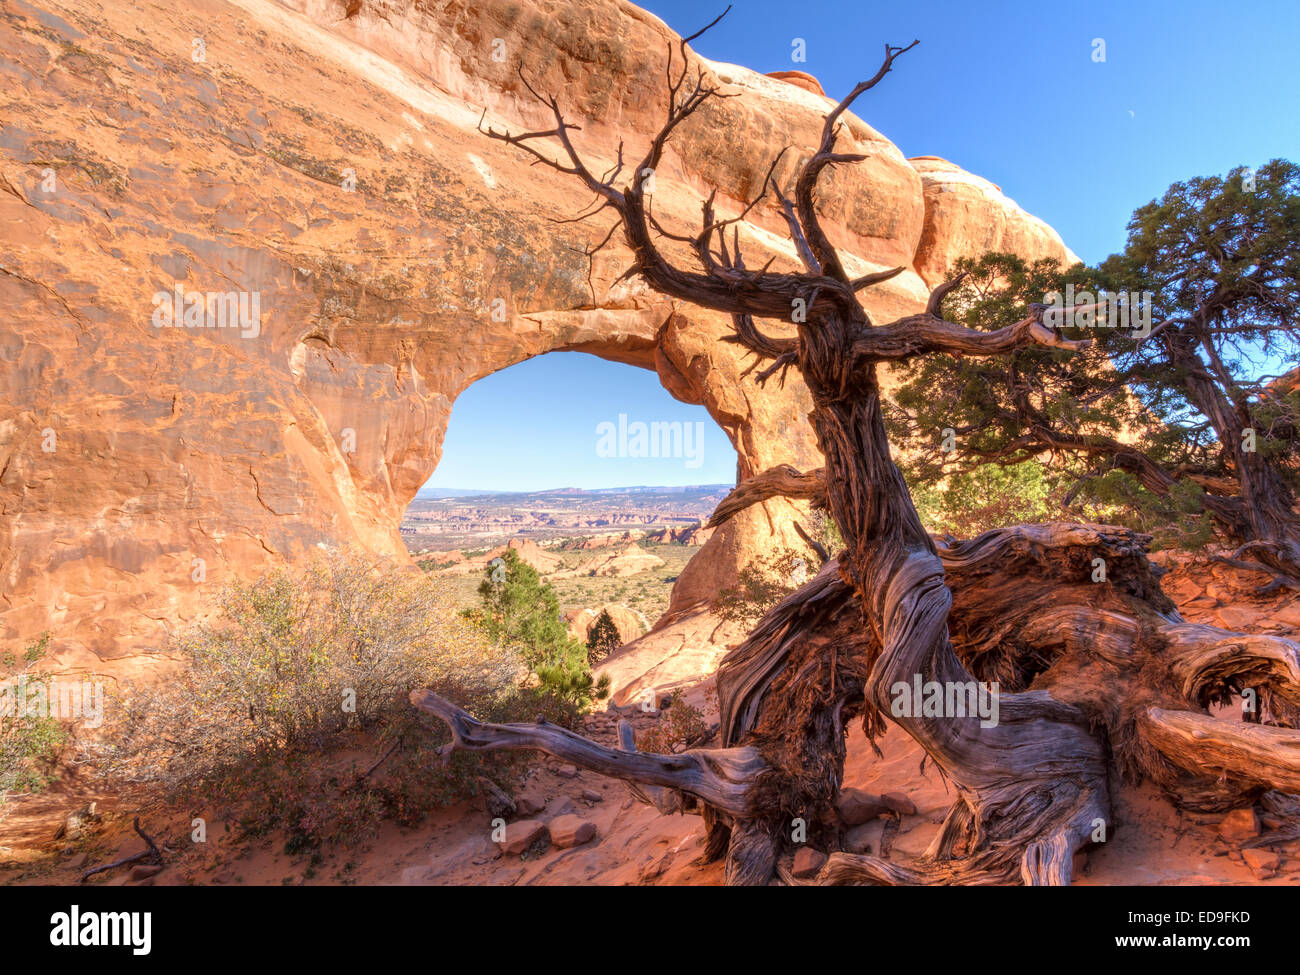 An Ent-like anthropomorphic Juniper Tree guards Partition Arch in the Devil's Garden section of Arches National Park in Moab Uta Stock Photo